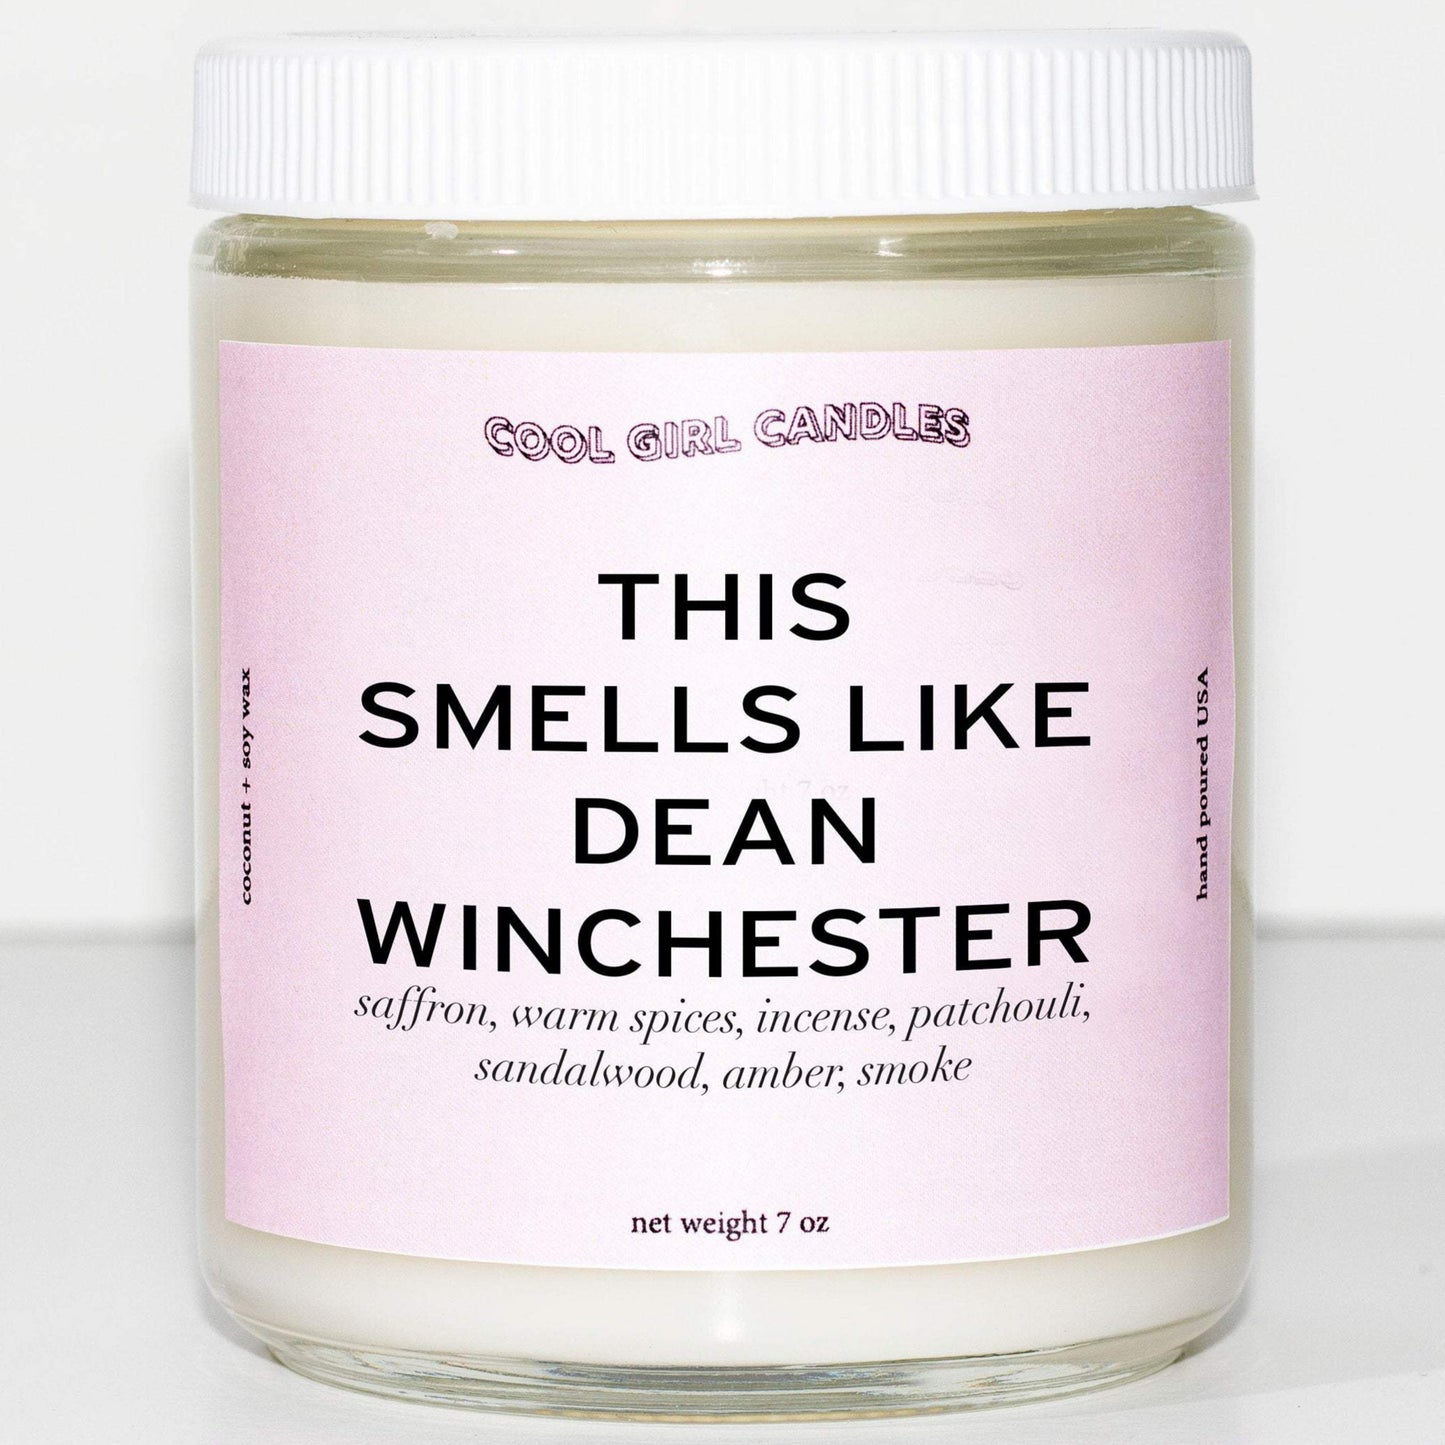 this smells like dean winchester candle by cool girl candles